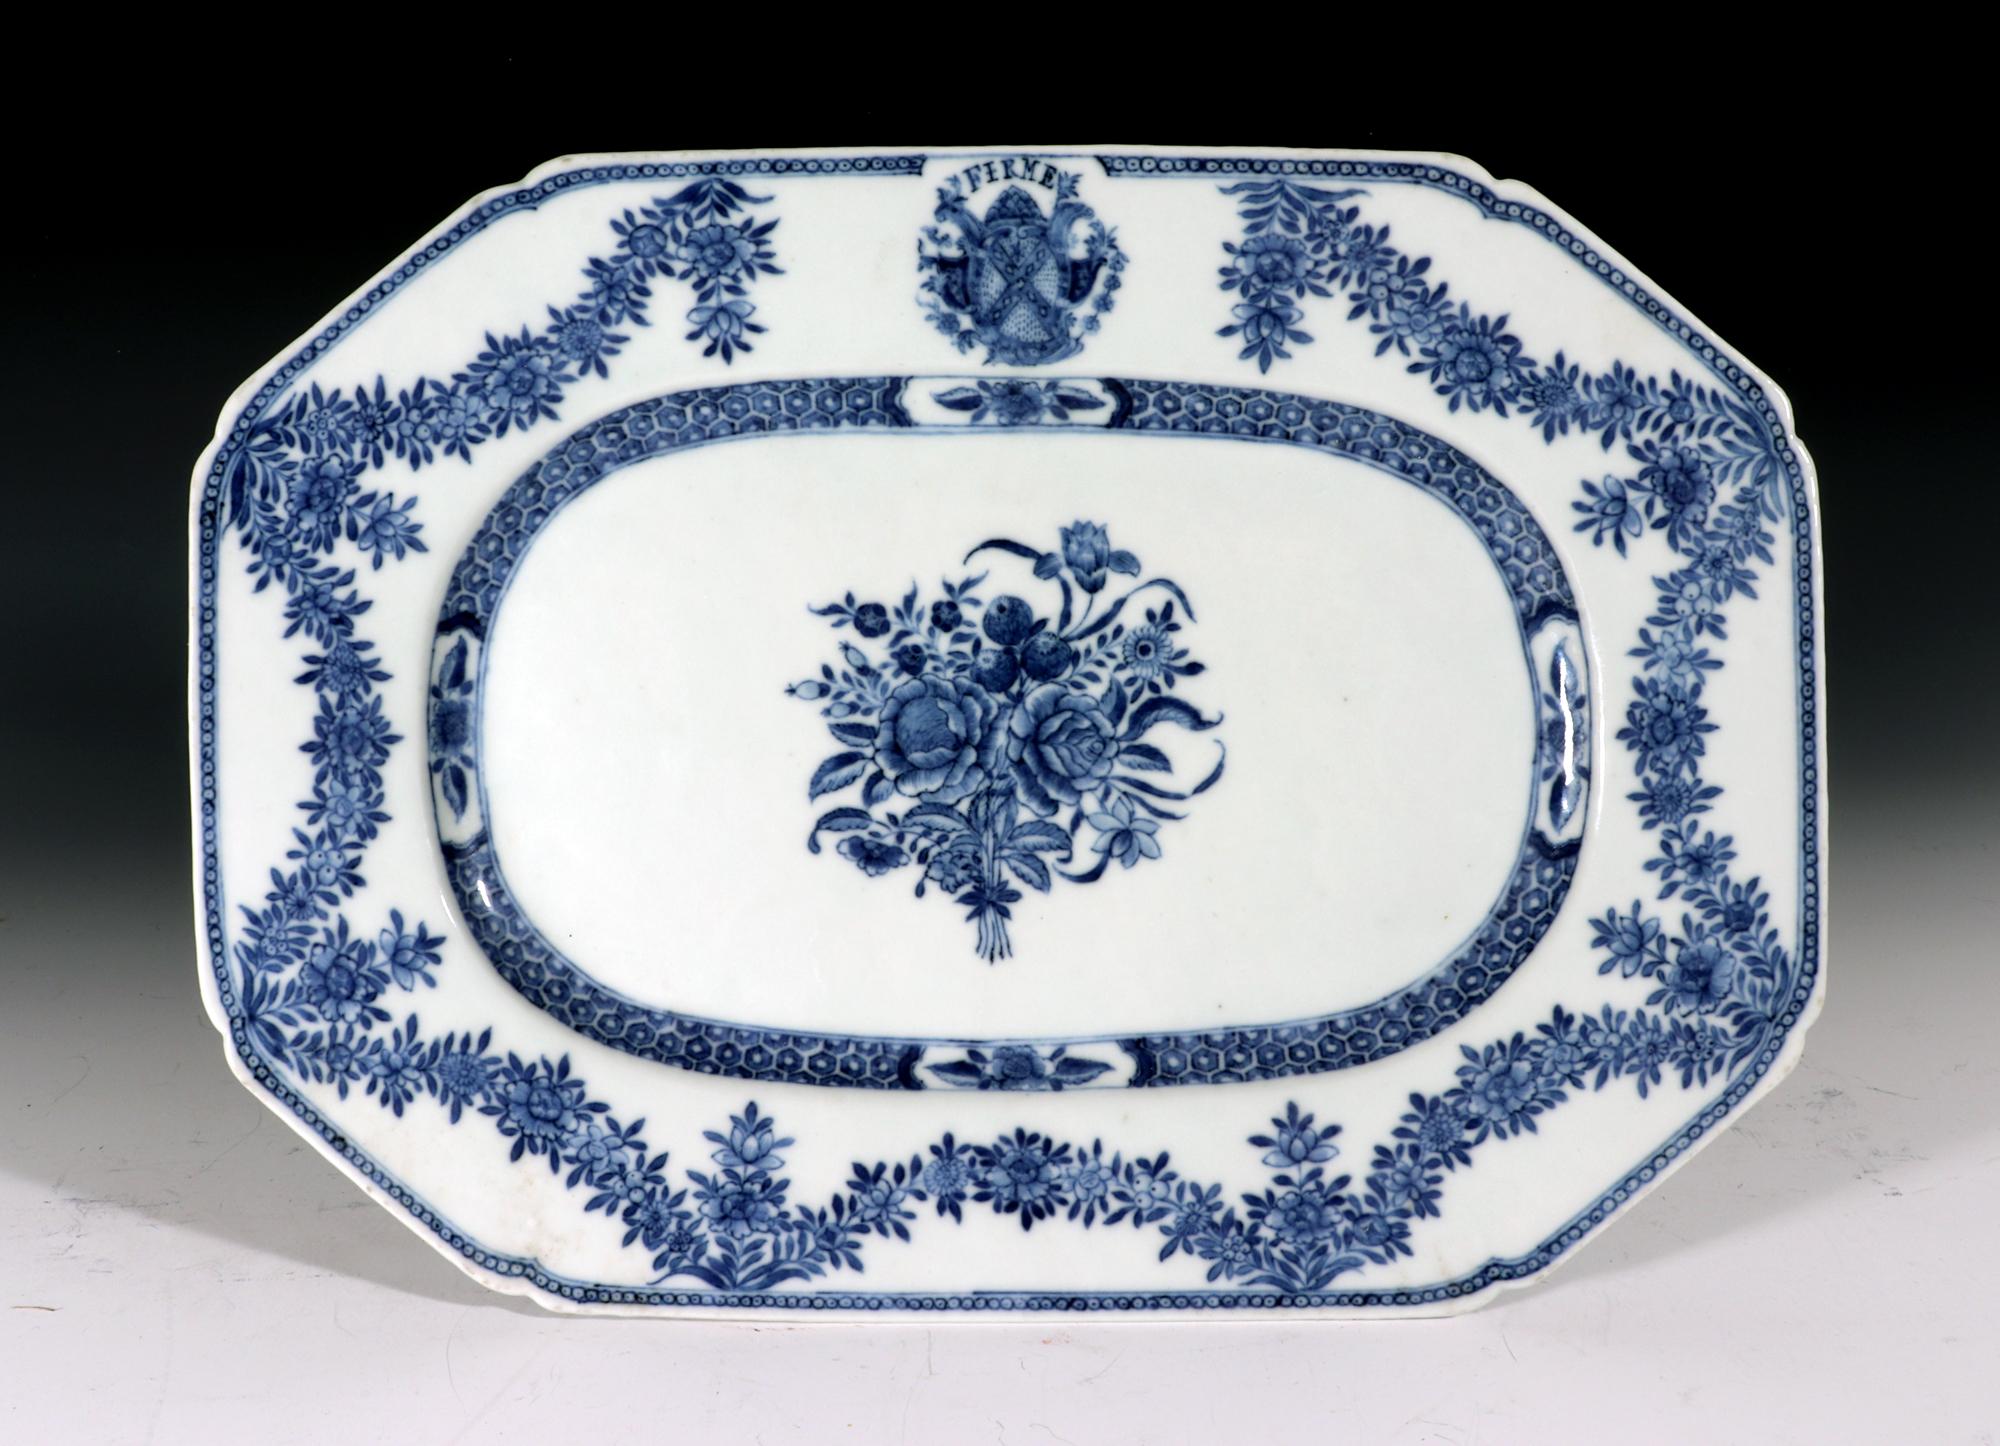 Chinese Export Underglaze blue armorial porcelain dish
Arms of Dalrymple of Hailes,
Motto- FIRME,
circa 1775.

The Chinese export armorial underglaze blue and white dish of rectangular form with canted corners with a flower bouquet bound